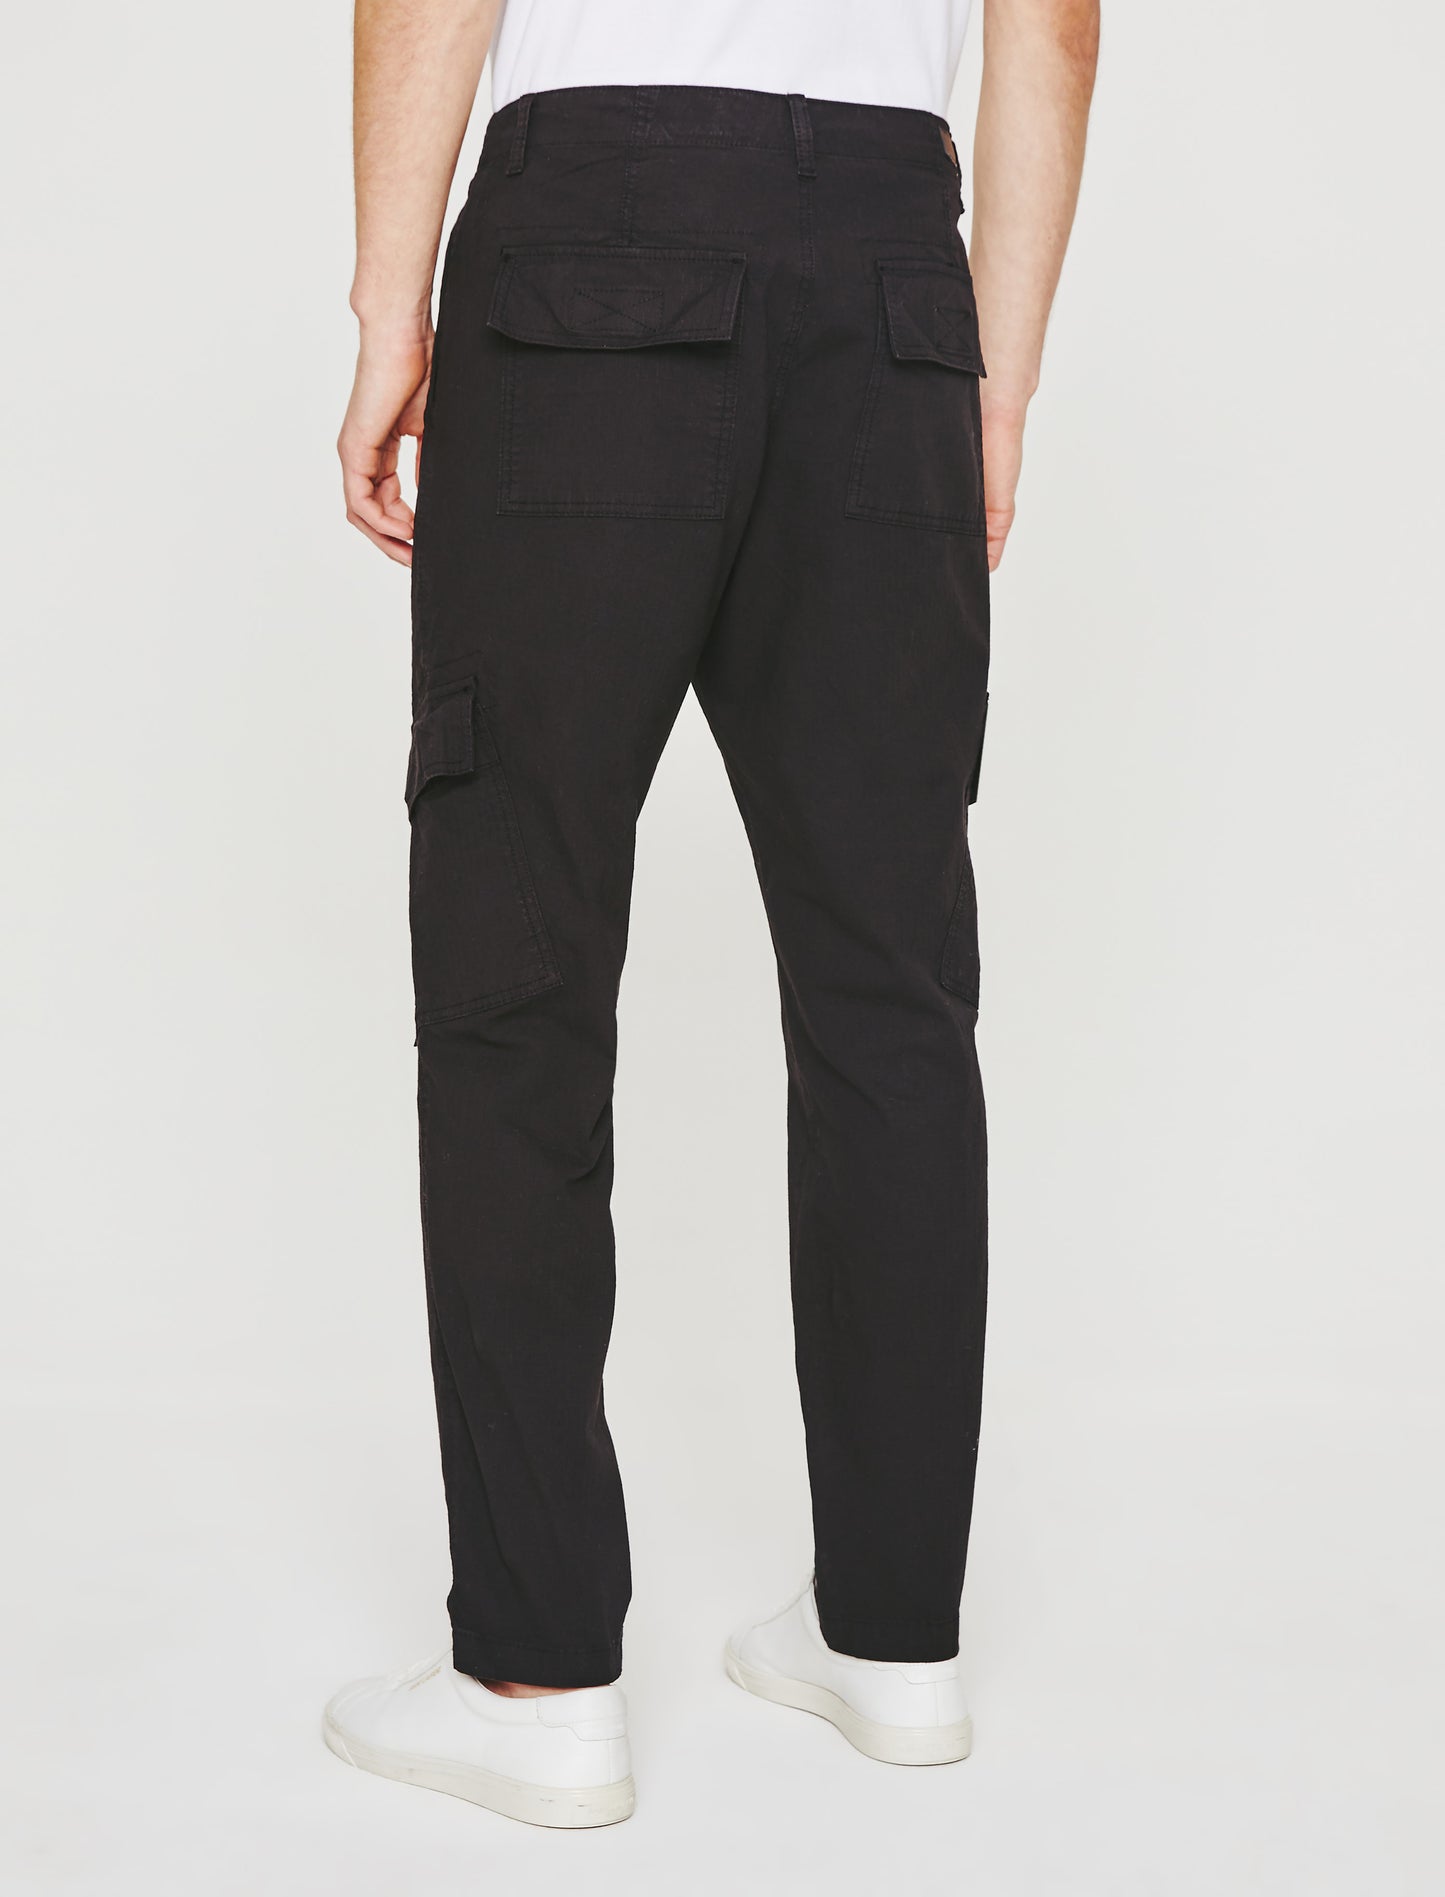 Wells Cargo Pure Black Relaxed Tapered Cargo Men Bottom Photo 6